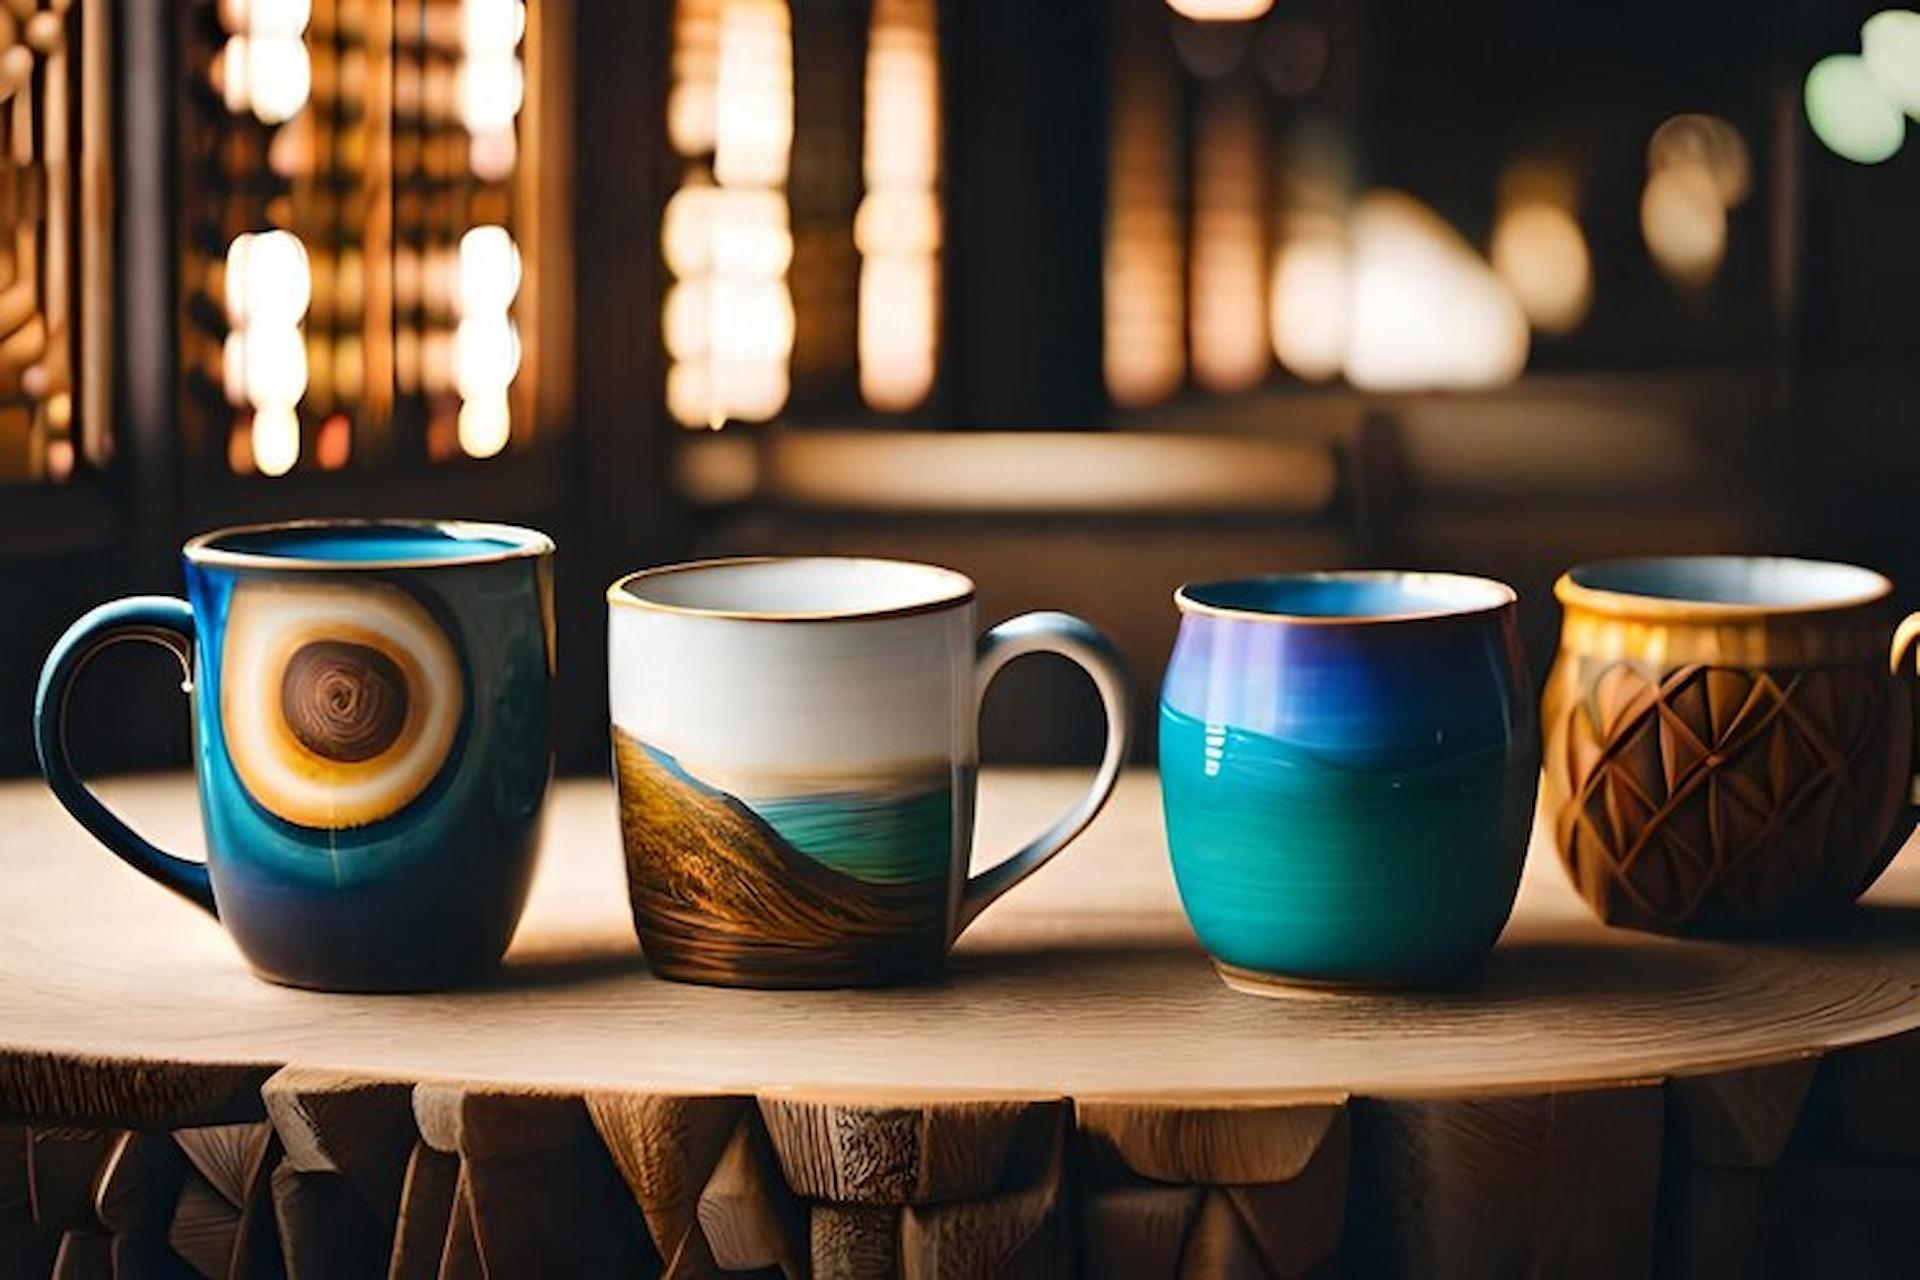 Elevate Your Coffee Experience With These Unusual Mugs